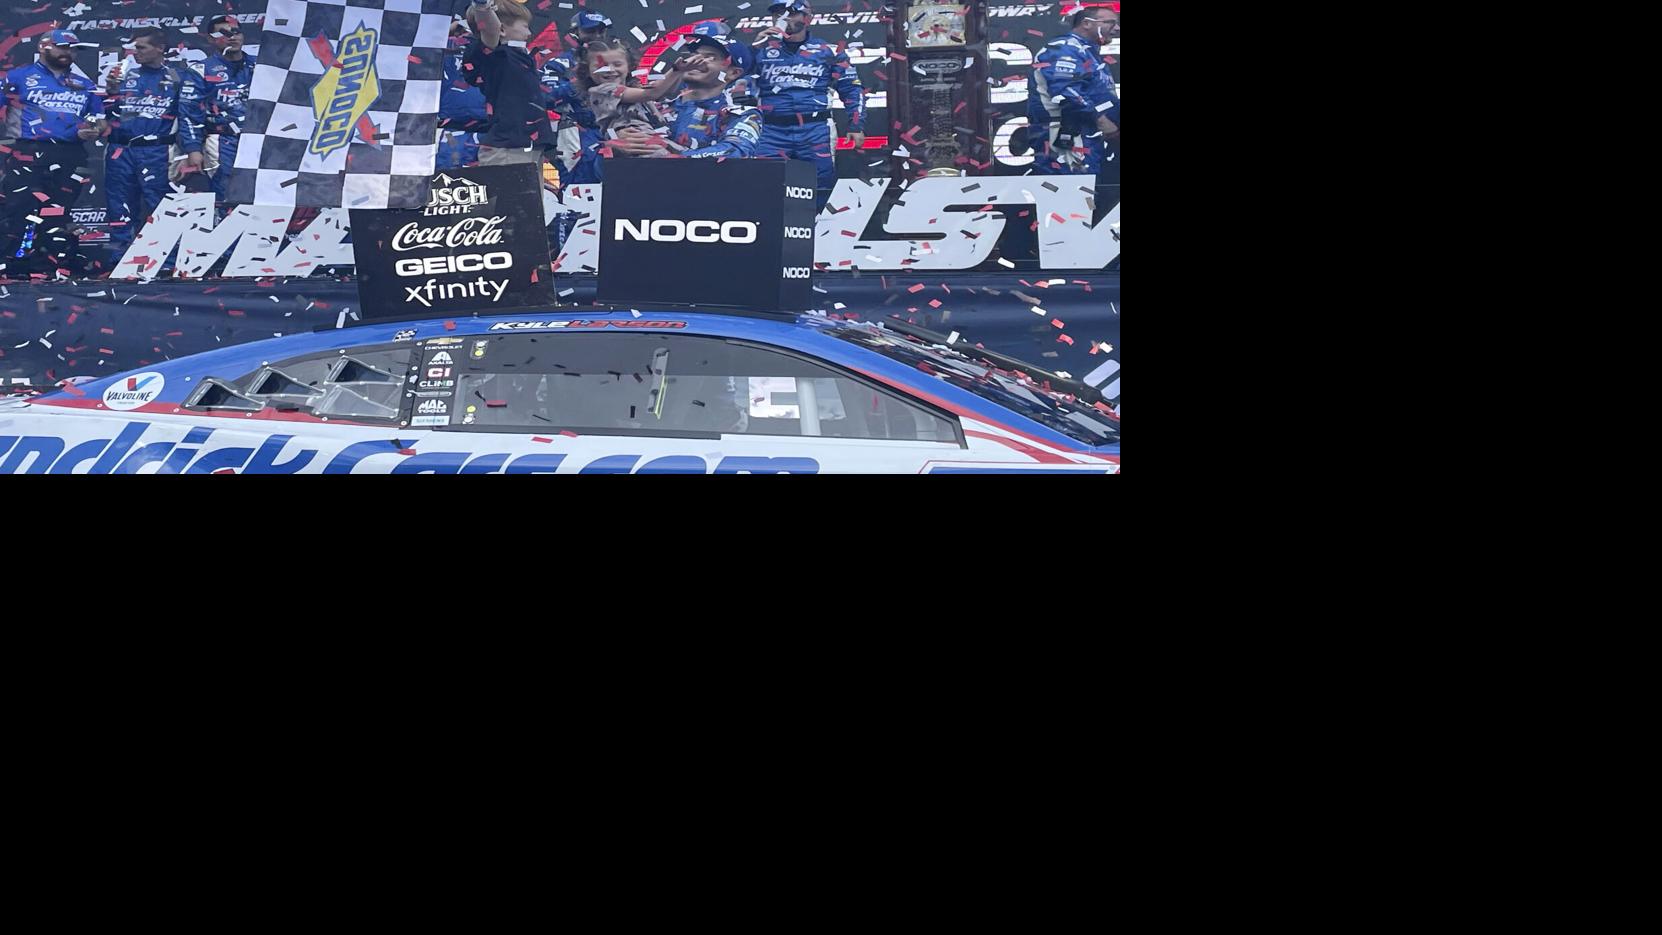 Larson pulls away from Logano to win at Martinsville